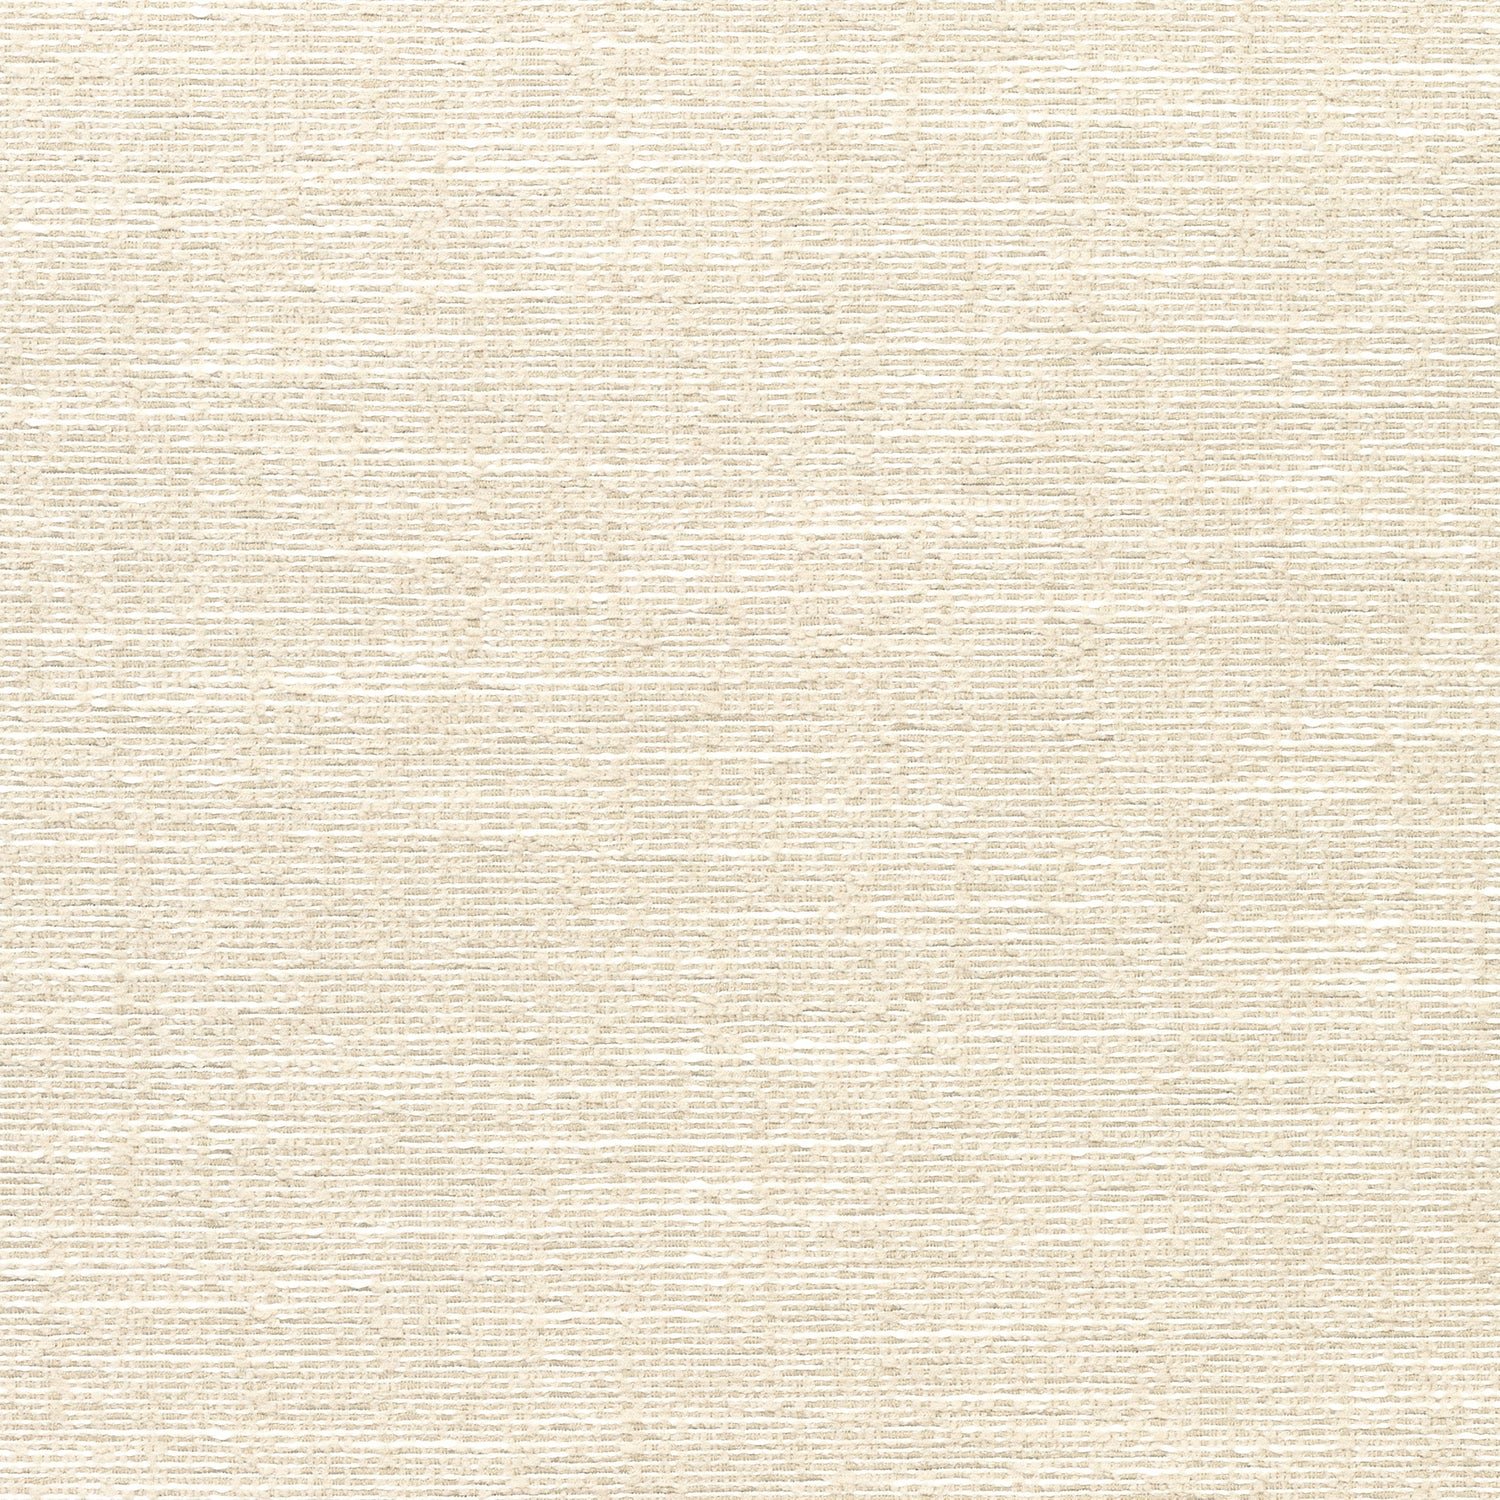 Freeport fabric in flax color - pattern number W74600 - by Thibaut in the Festival collection